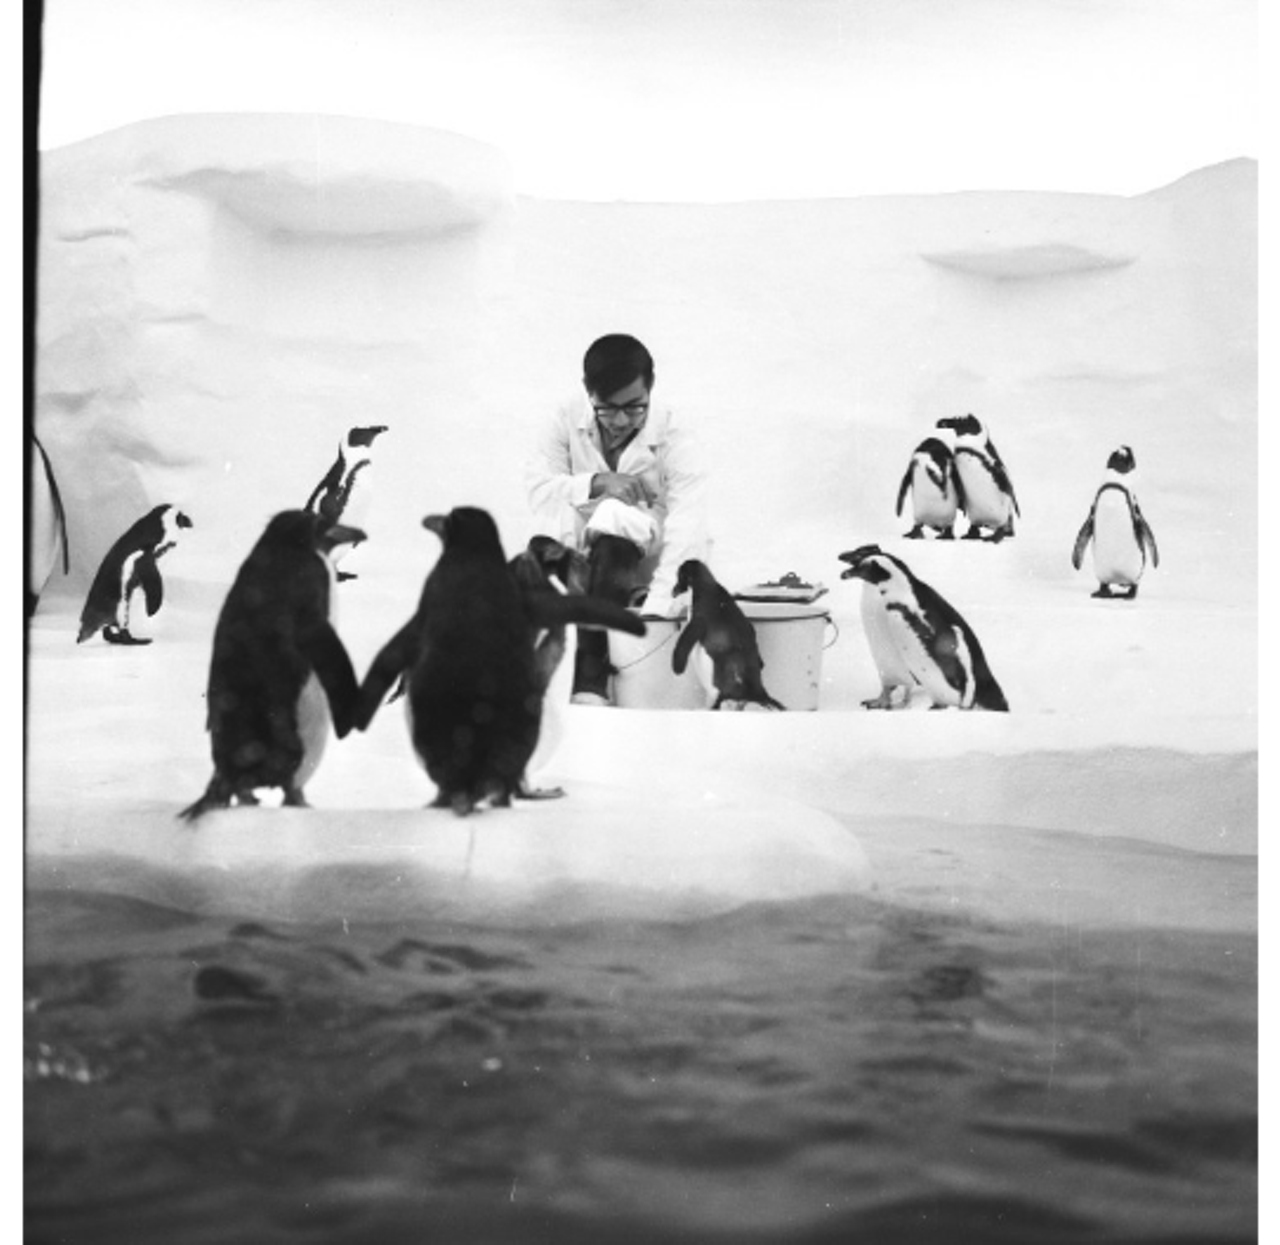 Lunch time in the Penguin place. (Date unknown)